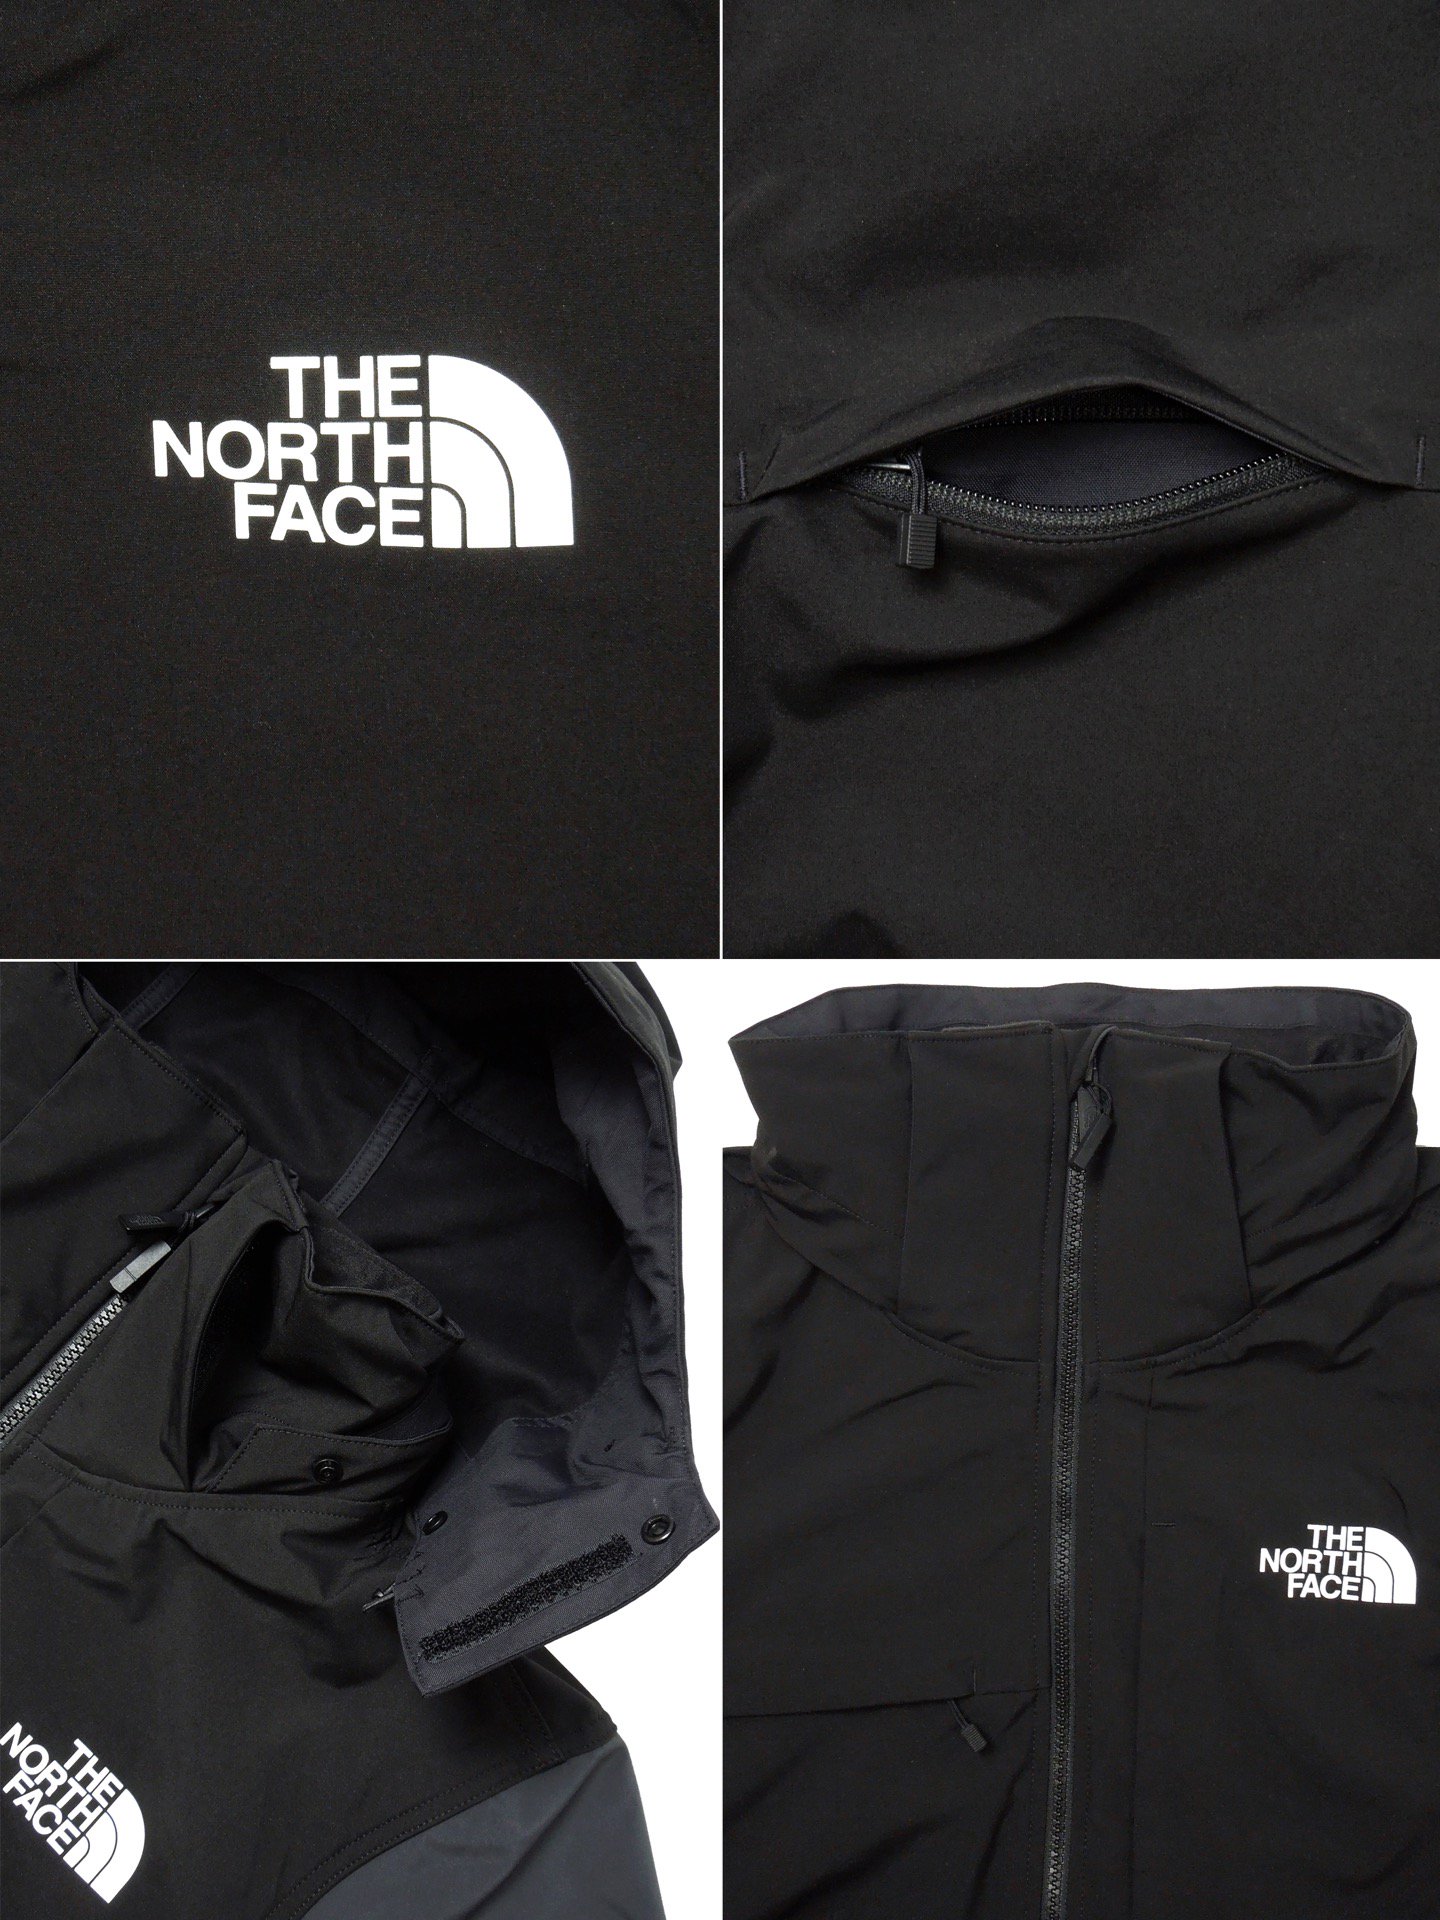 THE NORTH FACE] APEX STORM PEAK TRICLIMATE 3WAY JACKET「US限定モデル」 - FLASH  POINT Web Shop